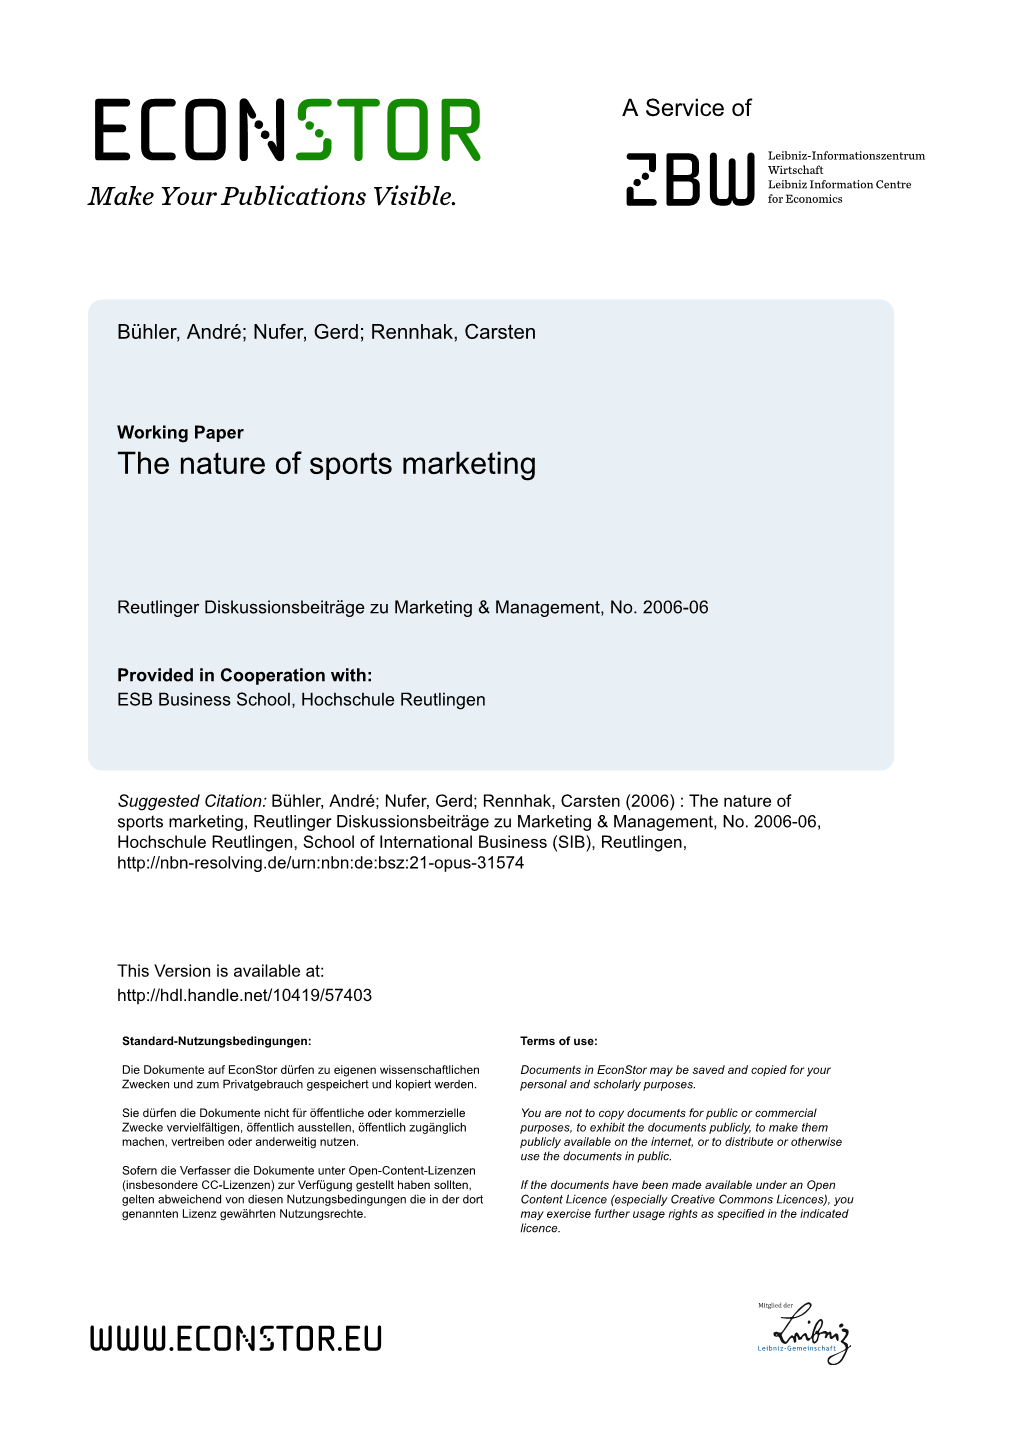 The Nature of Sports Marketing